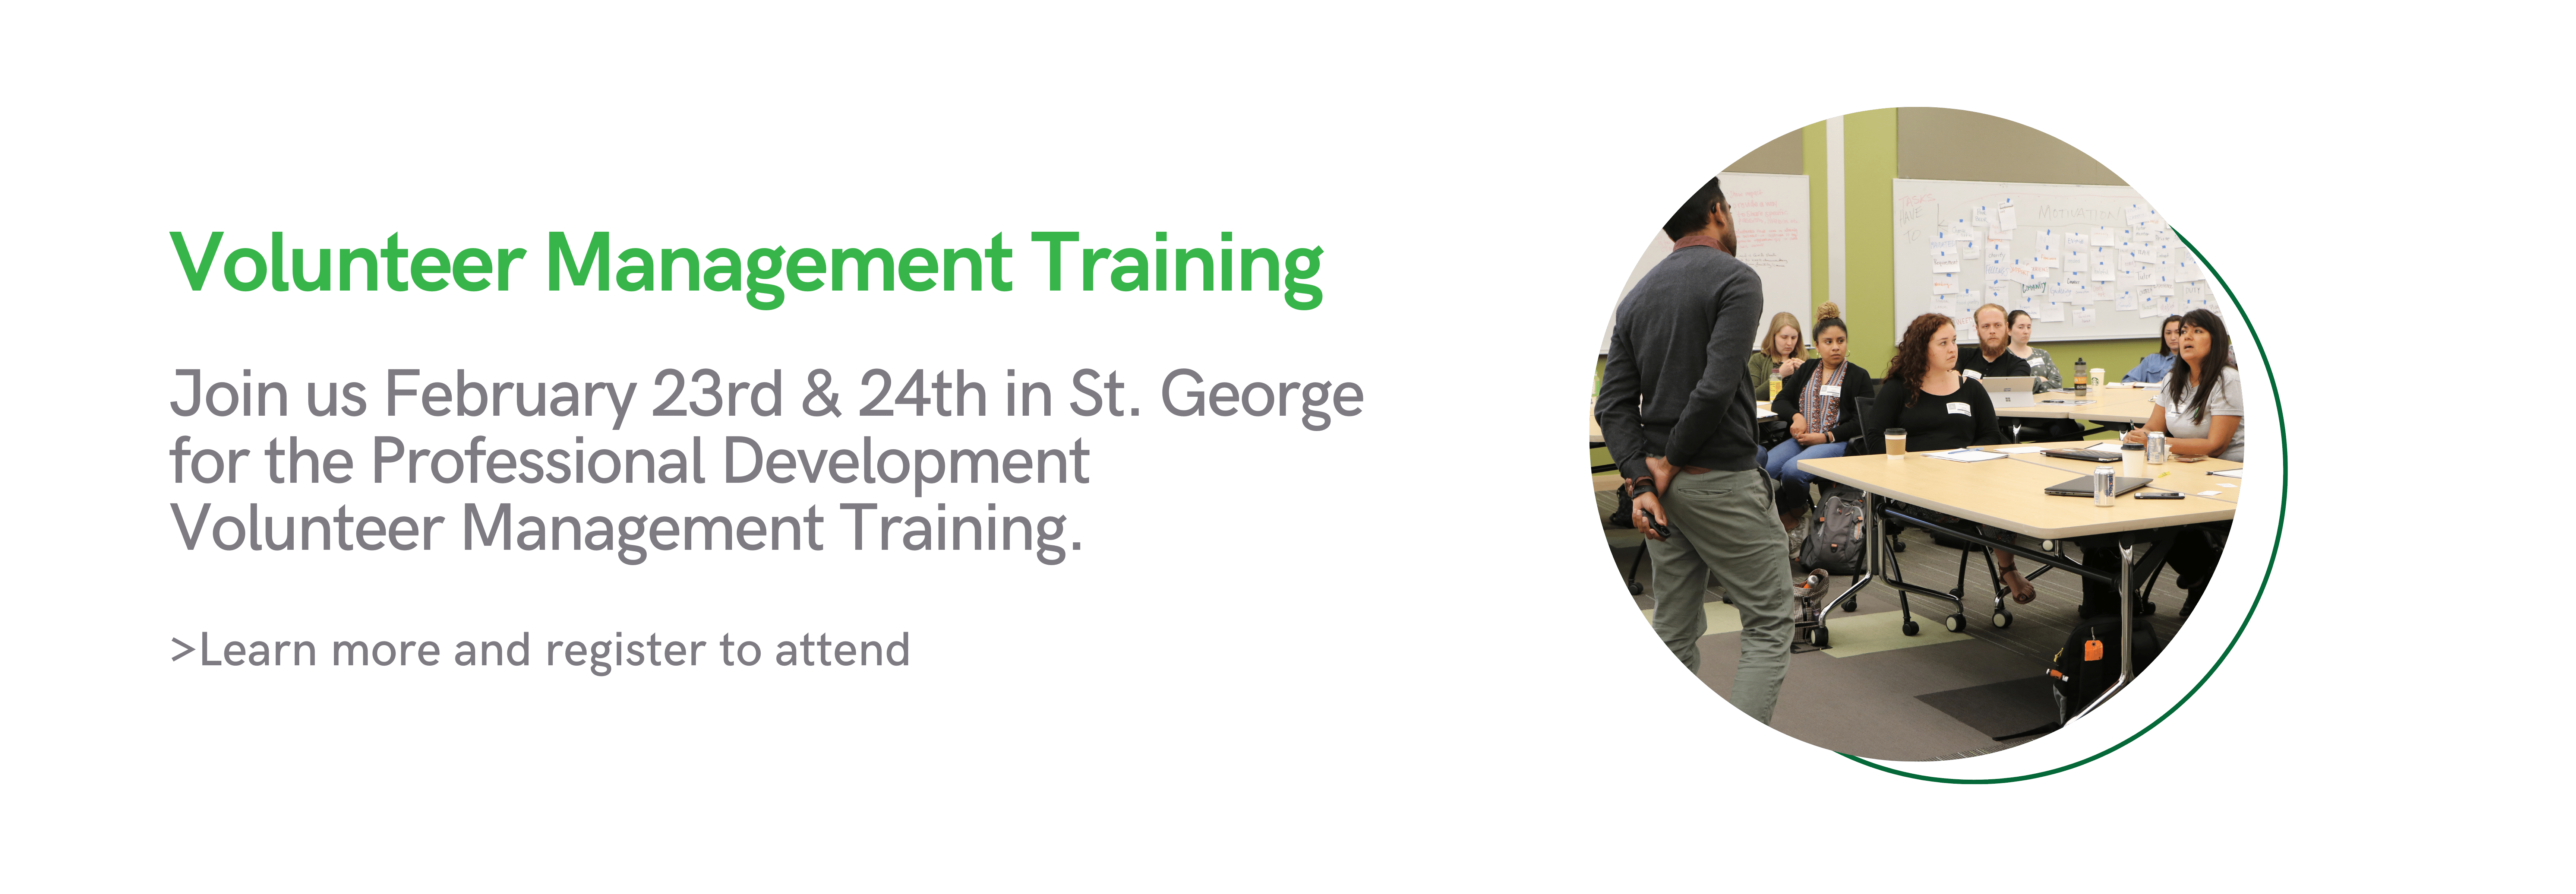 Volunteer Management Training. Join us February 23rd & 24th in St. George for the Professional Development Volunteer Management Training. >Learn more and register to attend